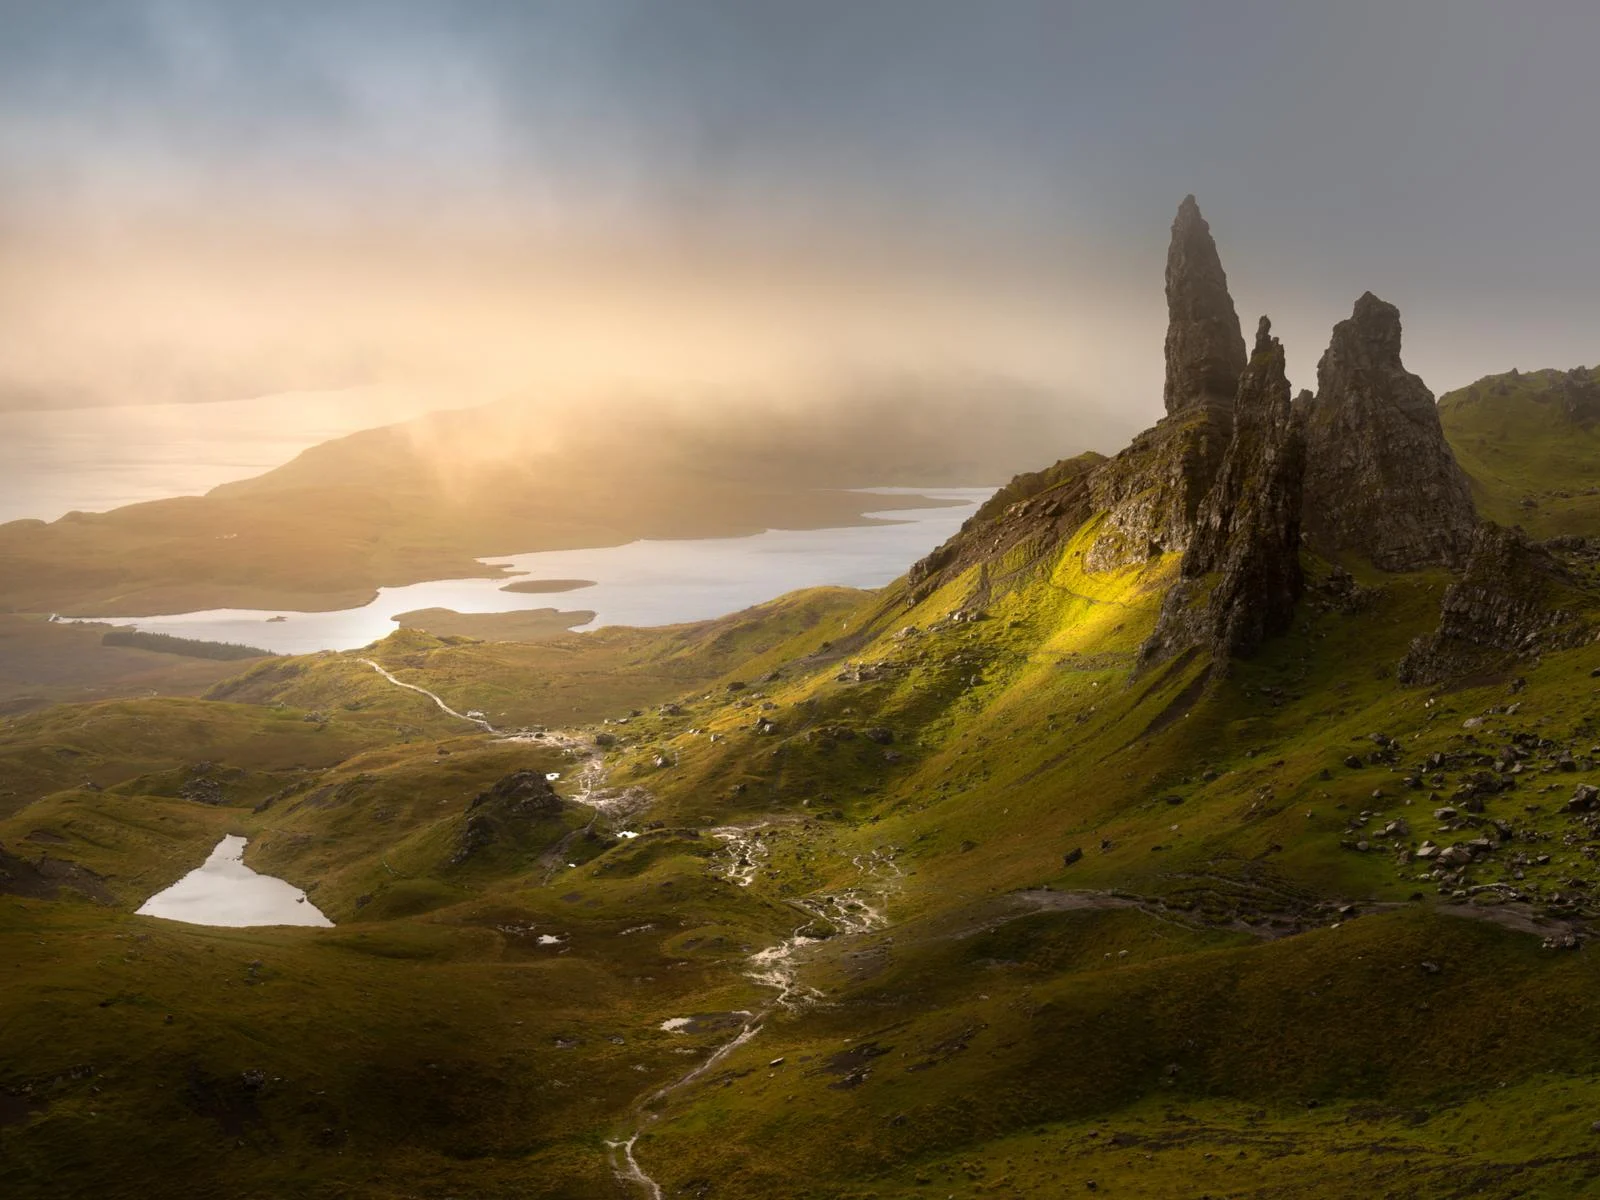 Dark clouds over one of the best island vacations, the Isle of Skye in Scotland